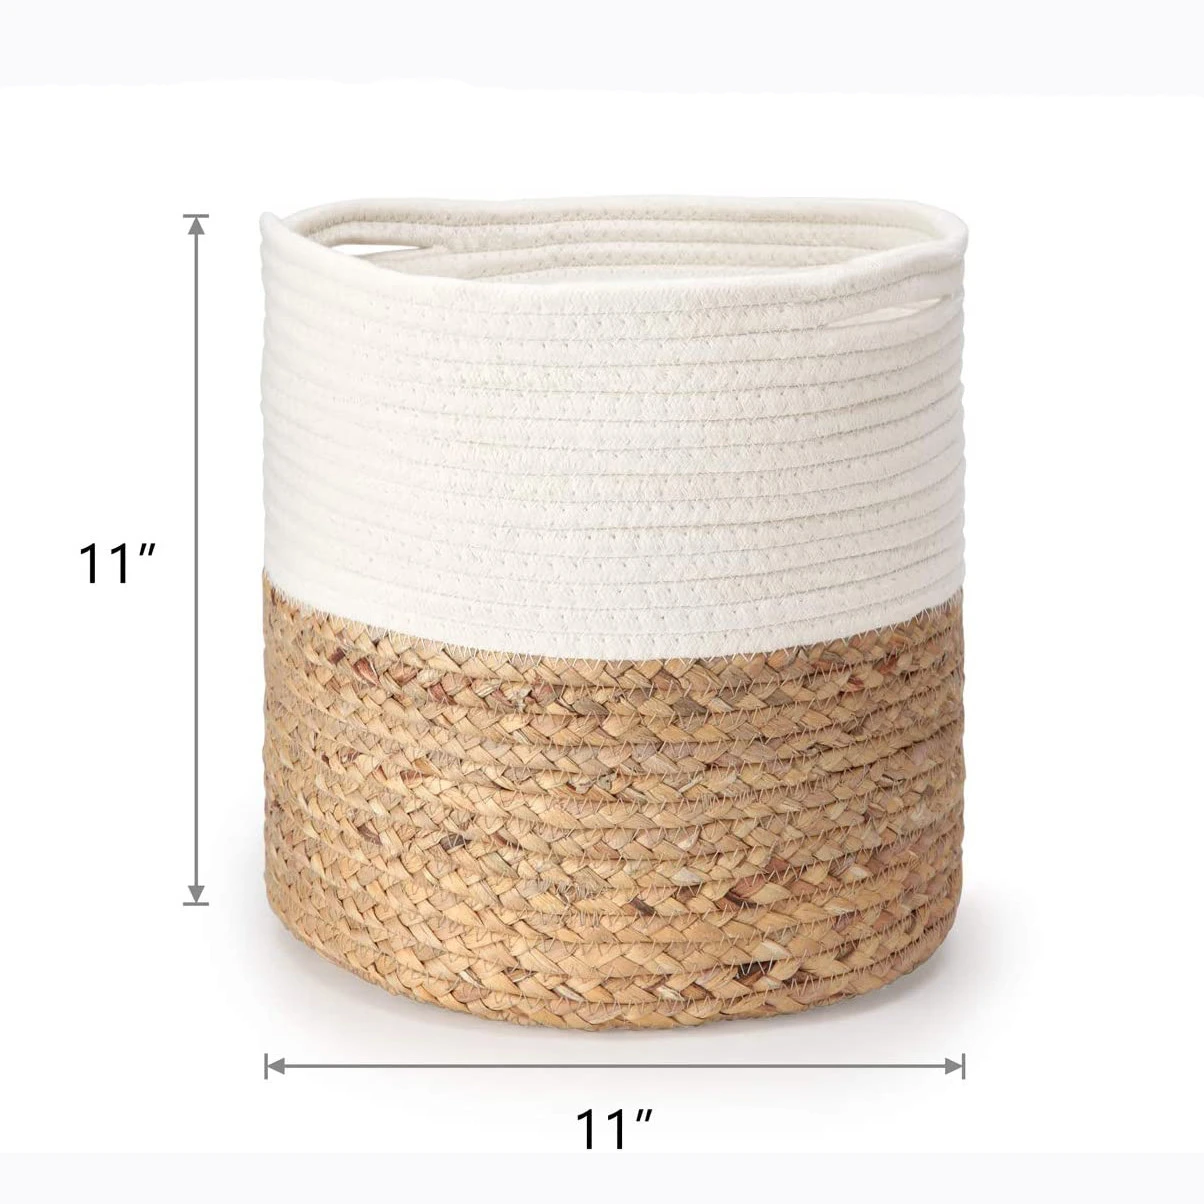 11" x 11" cotton rope plant basket with water hyacinth modern indoor planter pot woven storage organizer with handles home decor